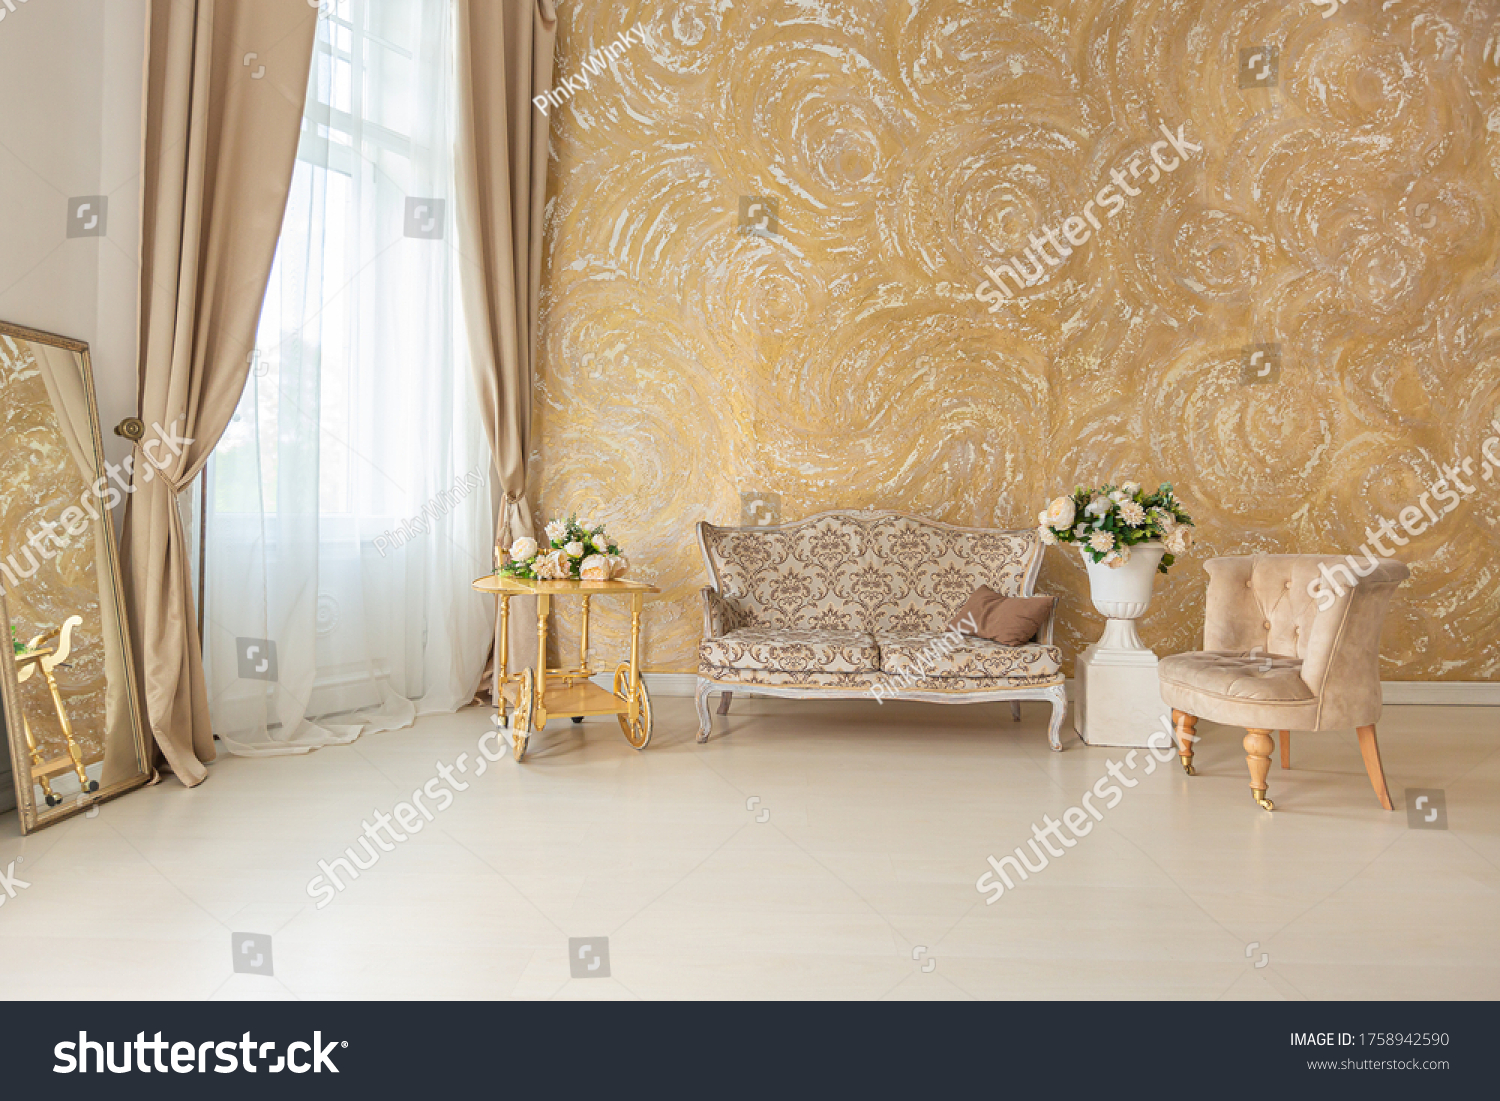 
luxurious expensive interior of a large baroque royal living room. antique furniture, gold trim, huge windows, fireplace with gold stucco on the walls. full of daylight #1758942590